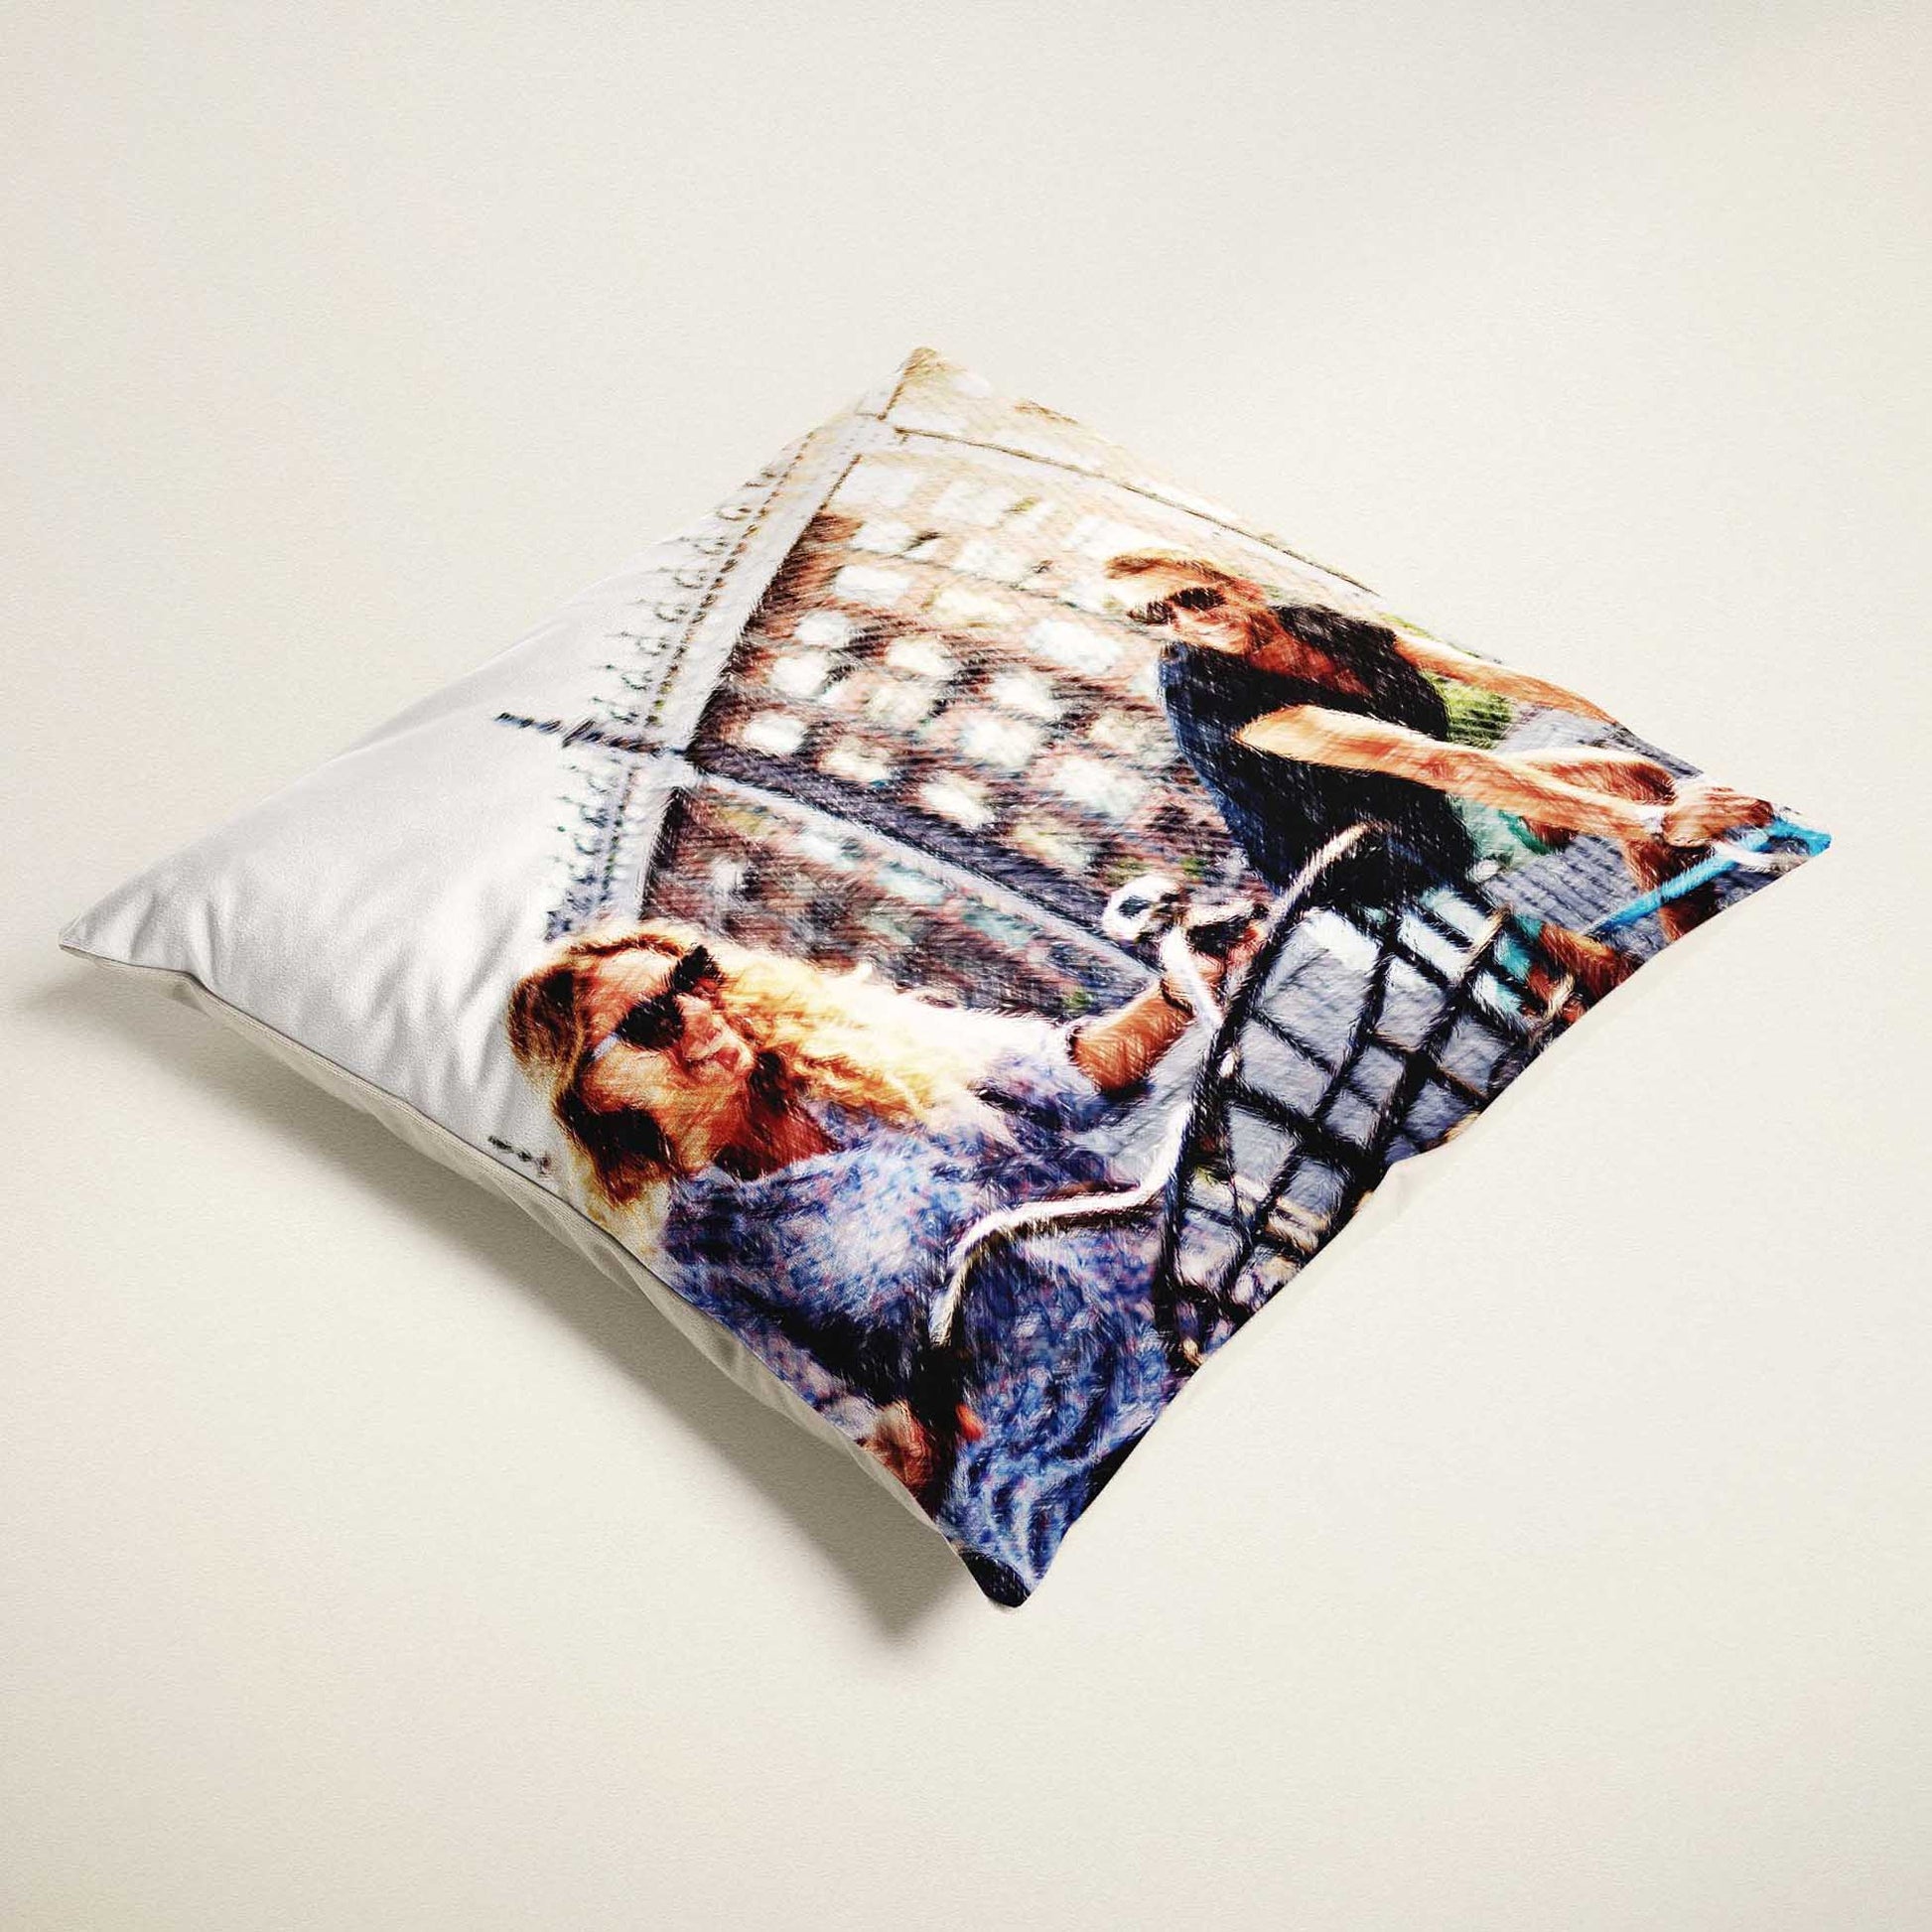 Create a warm and inviting atmosphere with our Personalised Colourful Drawing Cushion. Crafted from soft velvet and featuring a drawing from your photo, this cushion offers the perfect combination of comfort and personalization